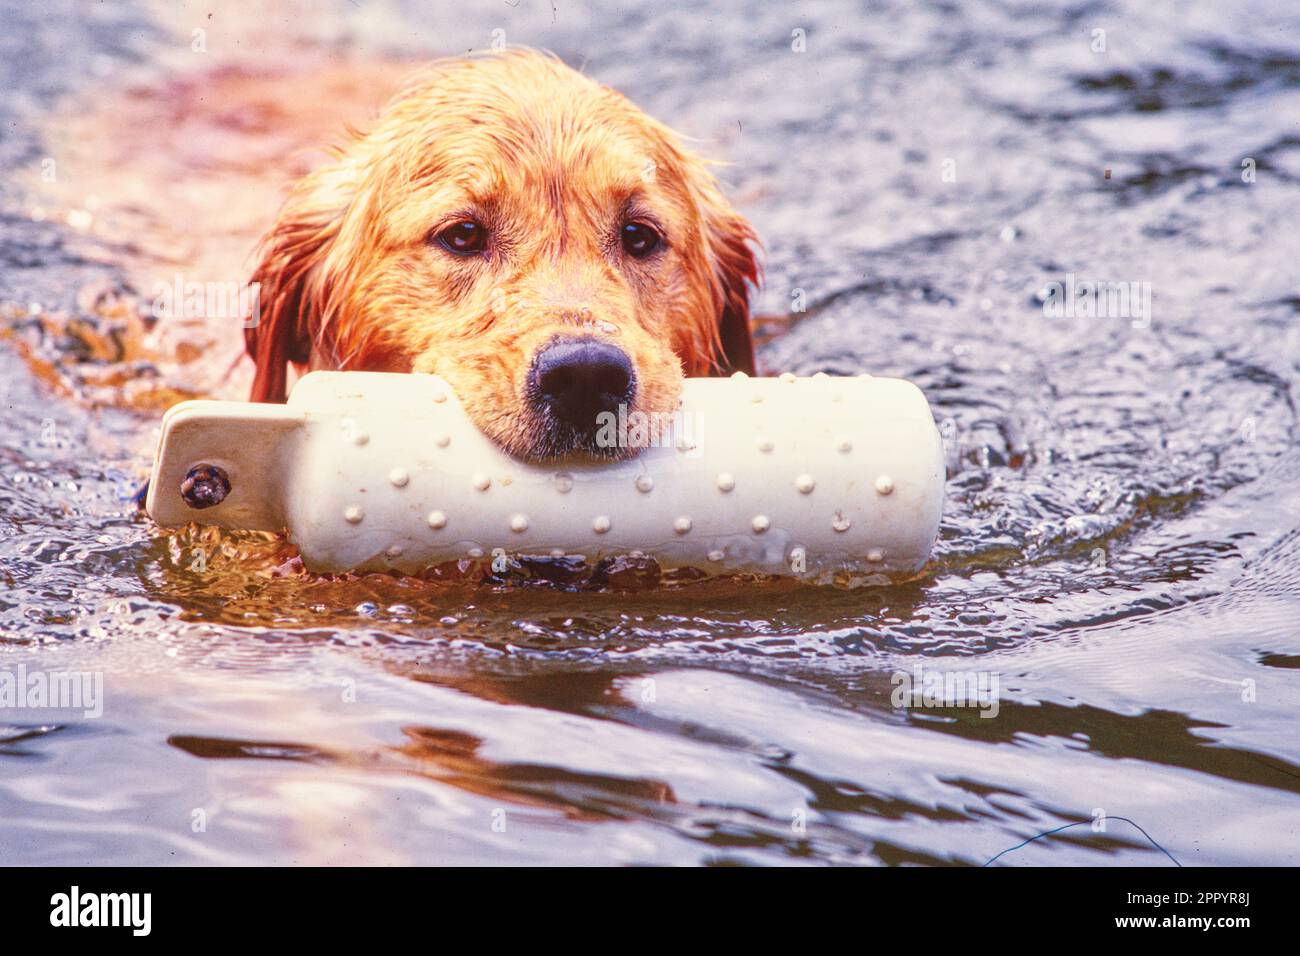 Golden retriever carrying floating water toy while swimming Stock Photo